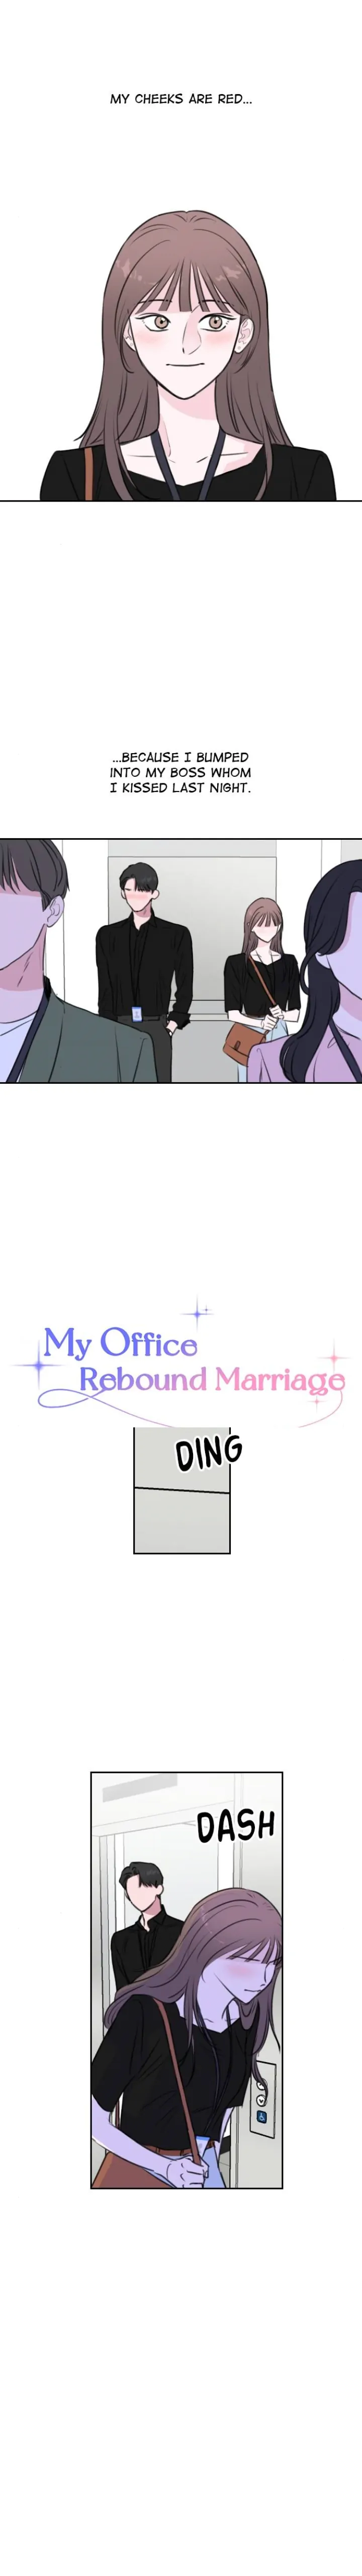 My Office Rebound Marriage - Page 2